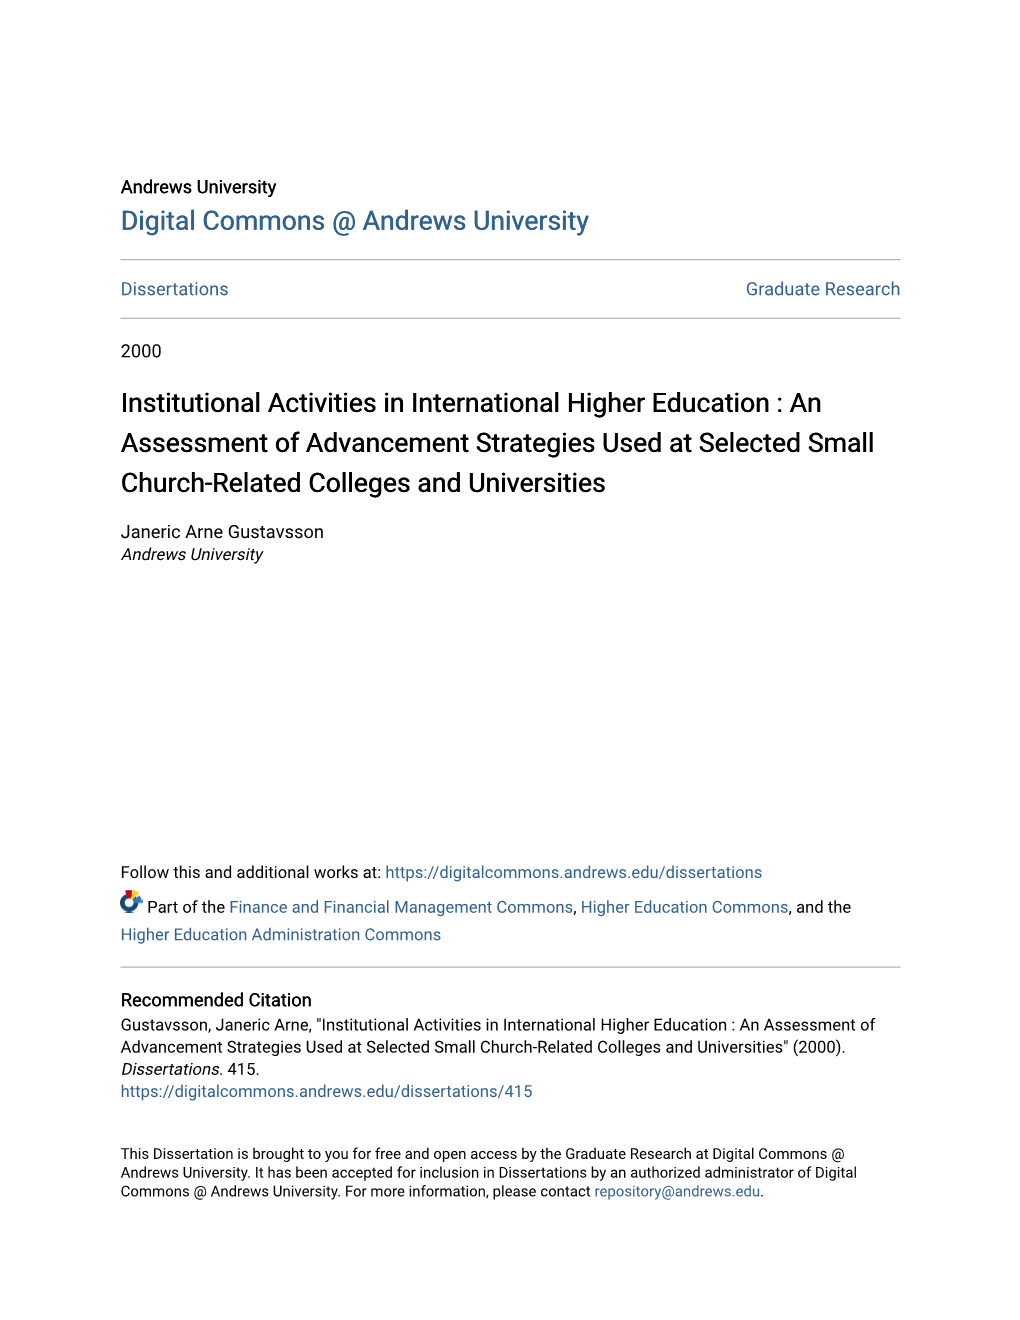 Institutional Activities in International Higher Education : an Assessment of Advancement Strategies Used at Selected Small Church-Related Colleges and Universities